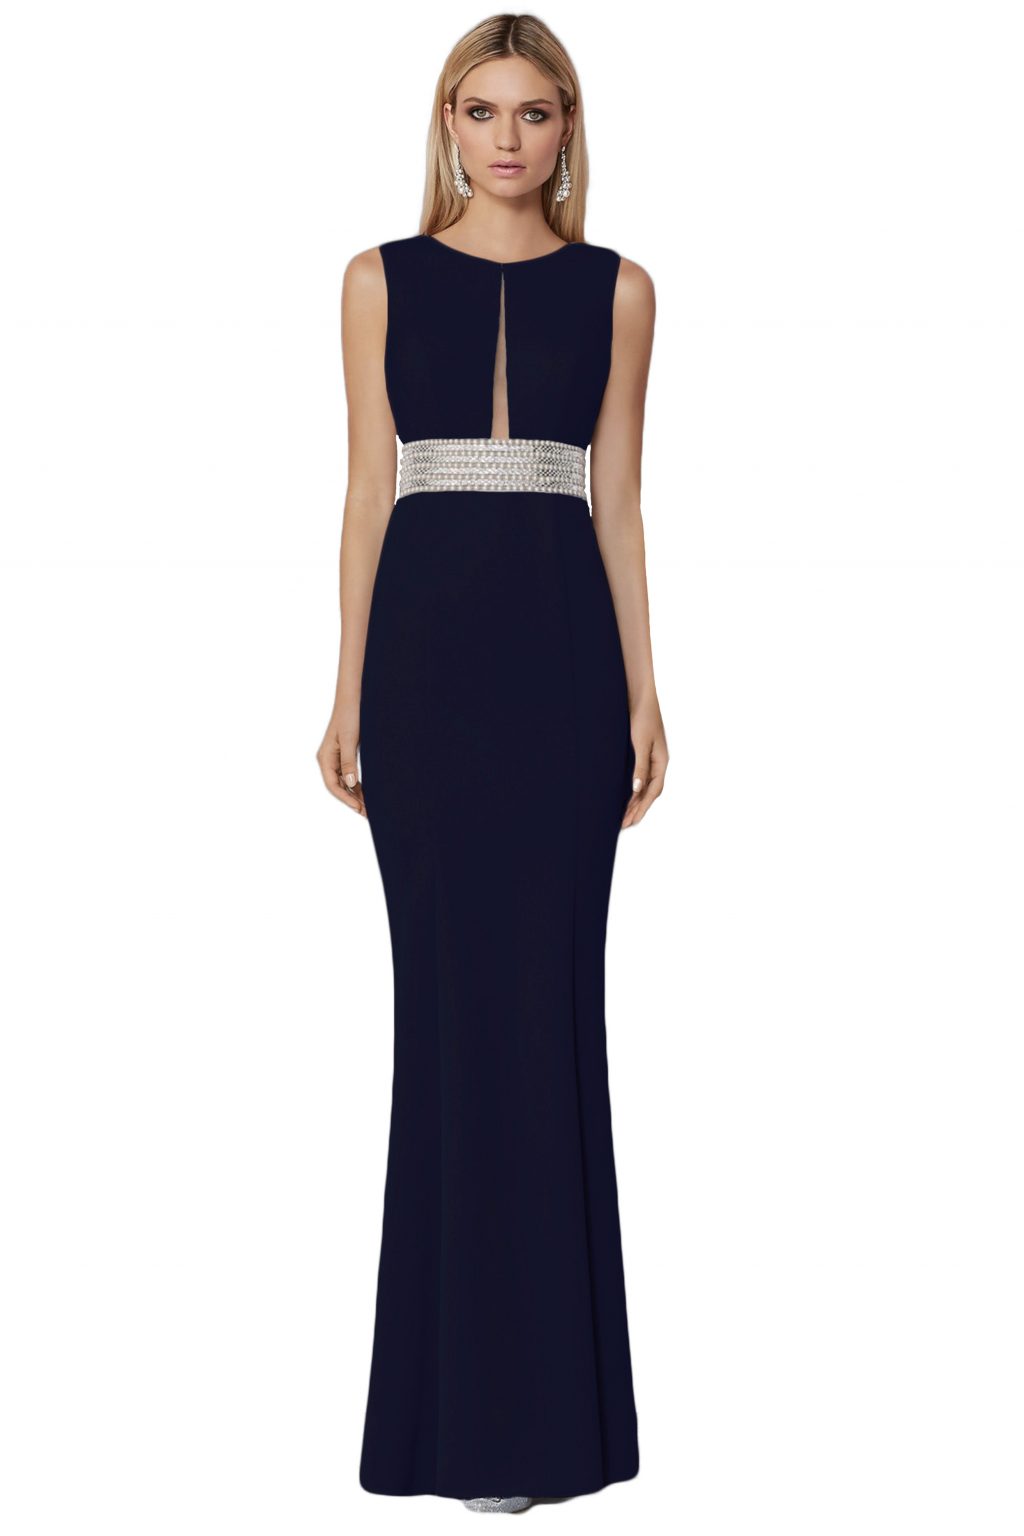 Full length dress with pearl waistband. 70696 - Catherines of Partick